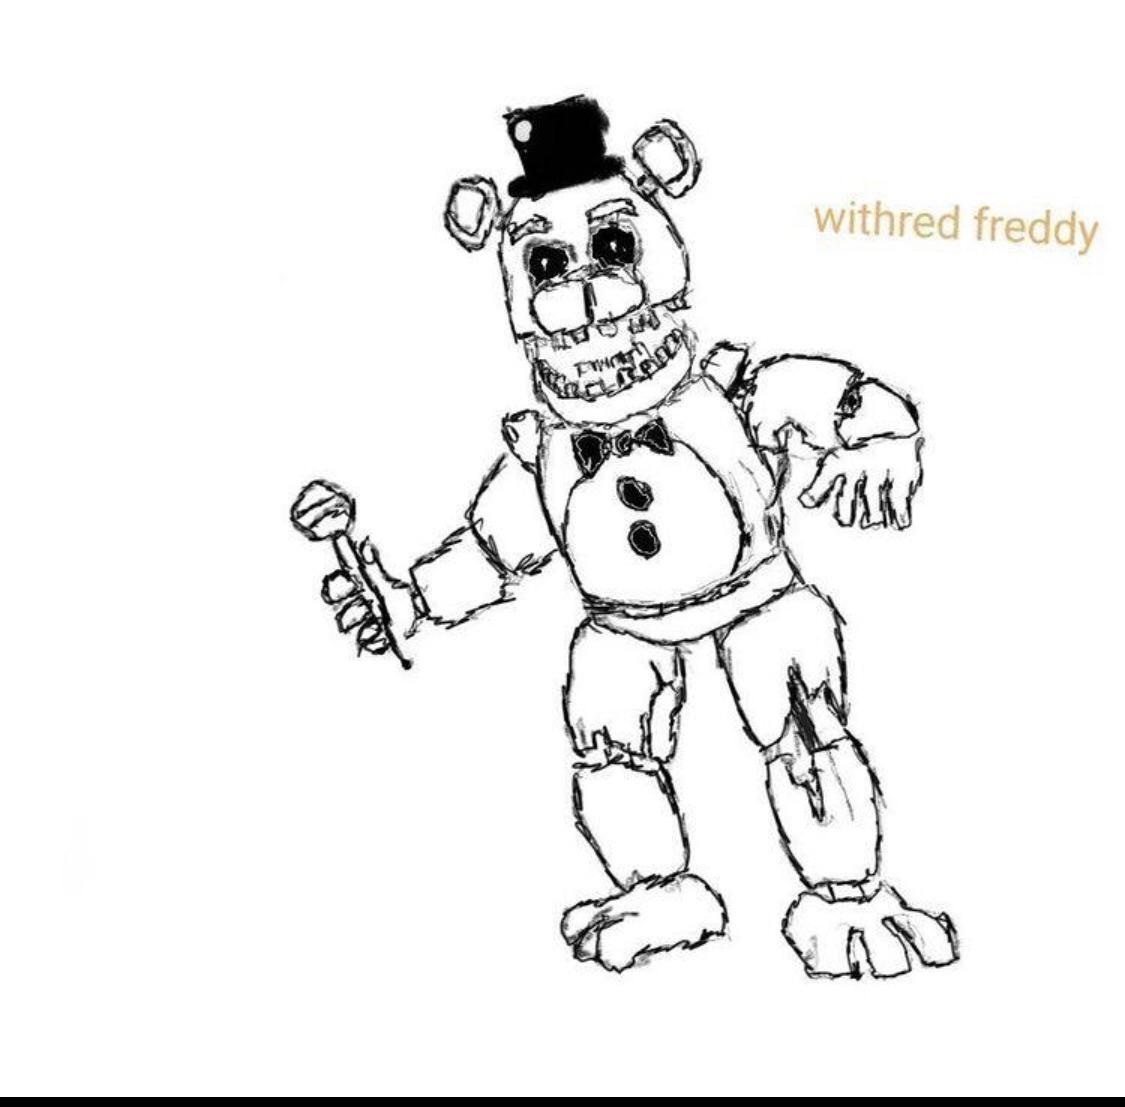 A wither freddy drawing hope ya like it ...